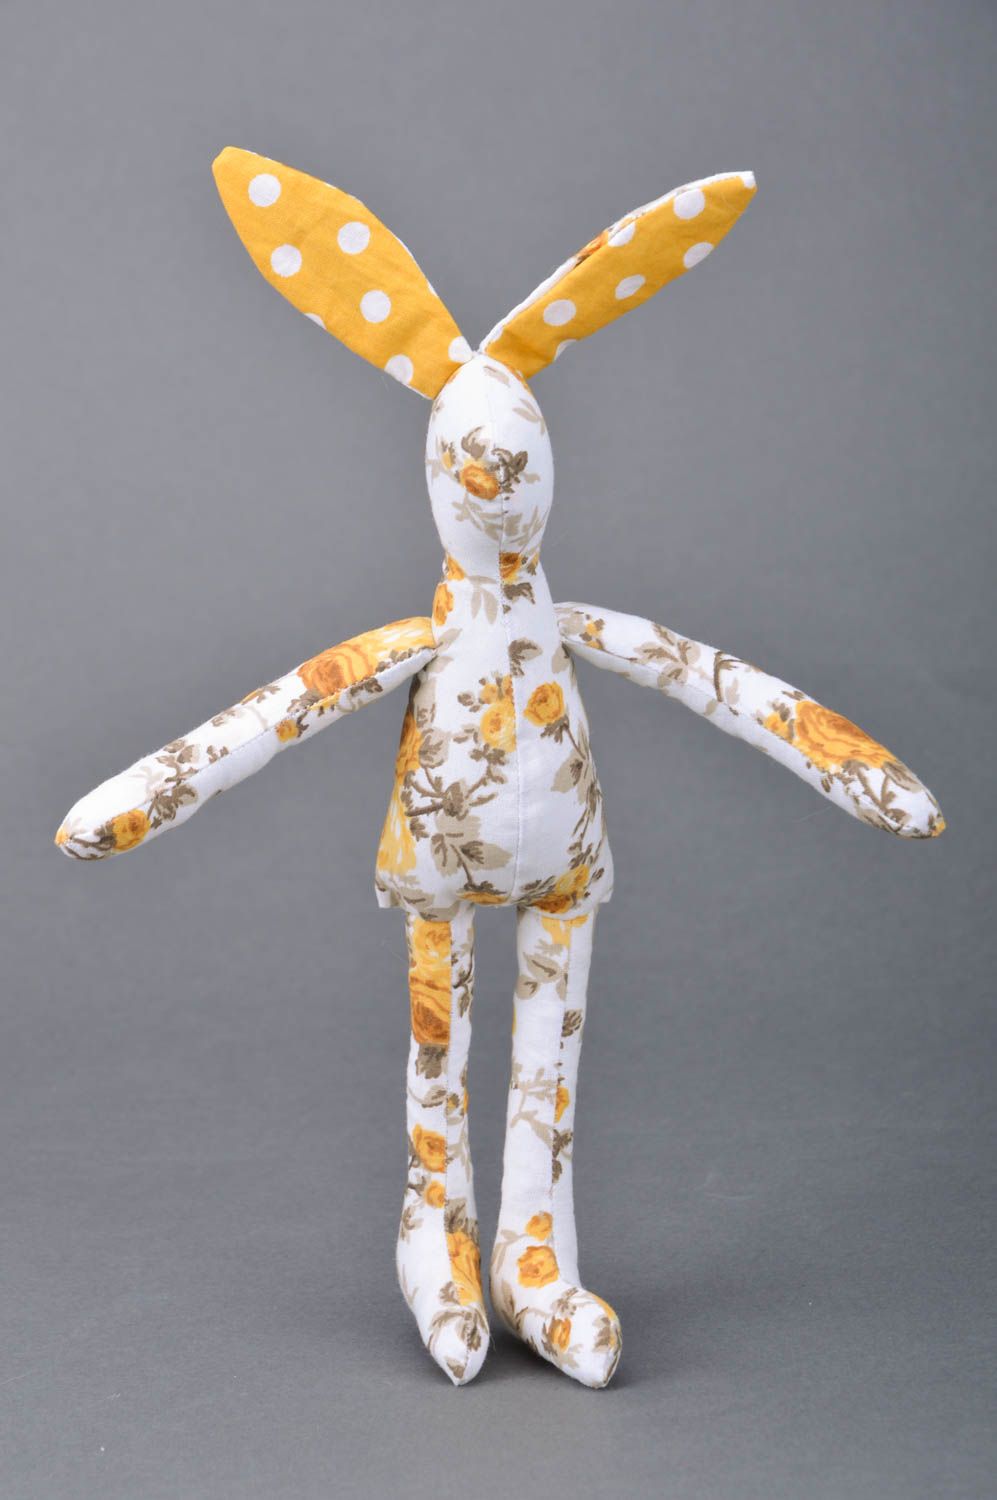 Handmade soft toy bunny made of fabric with floral print interior decor ideas photo 2